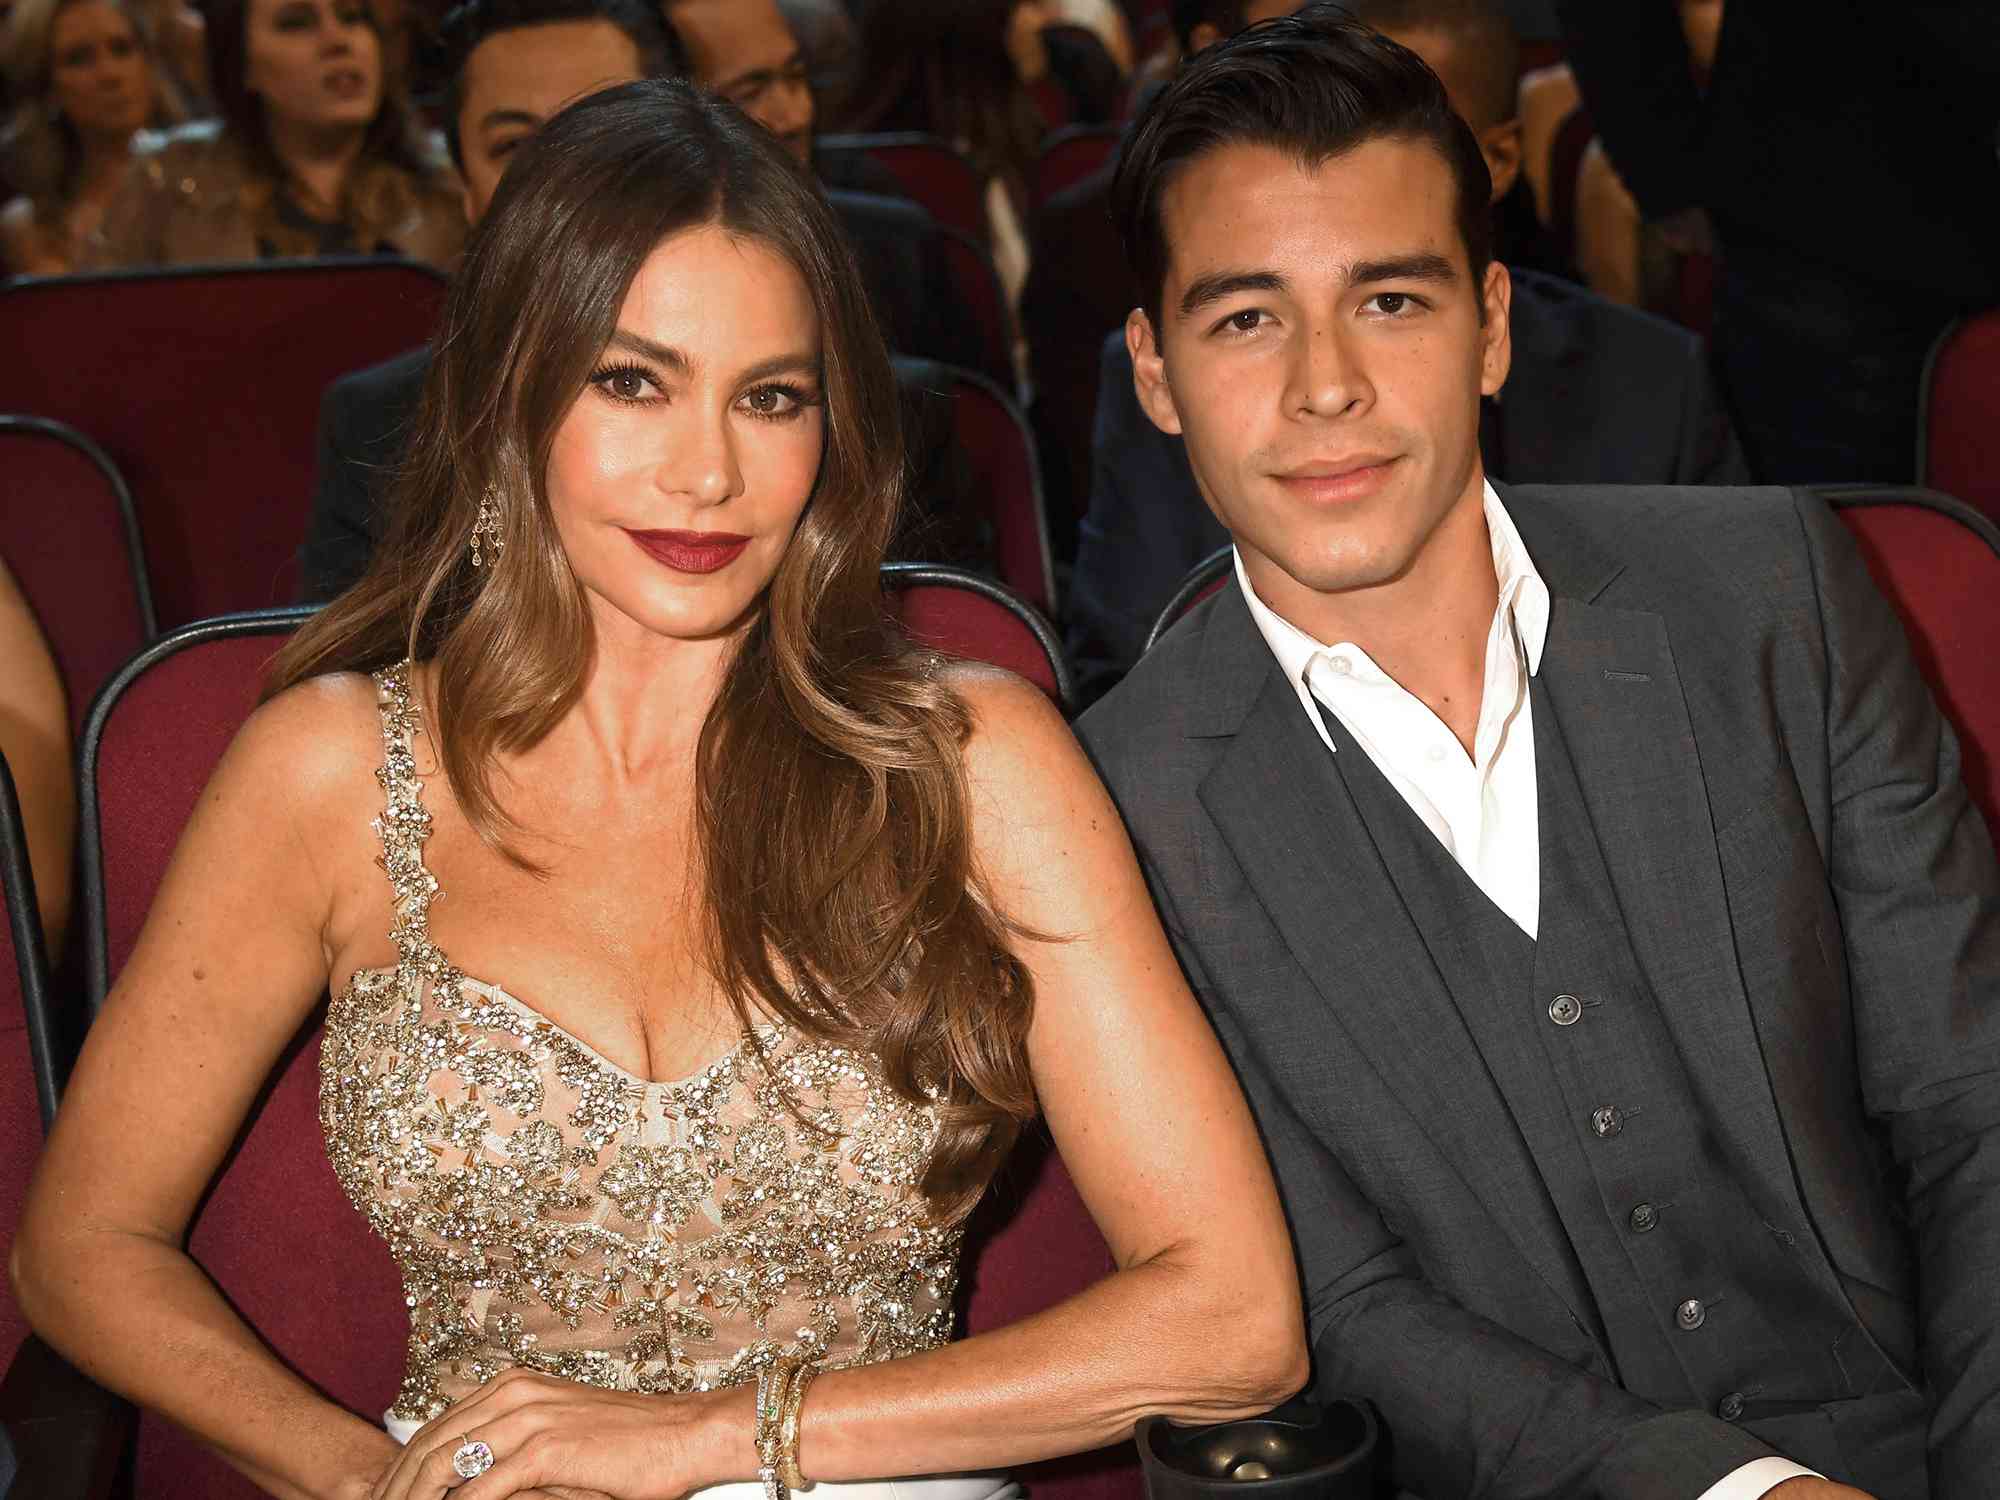 Sofia Vergara Says Son Manolo's 'Old Soul' and 'Weird Things' Inspired Manny from “Modern Family”